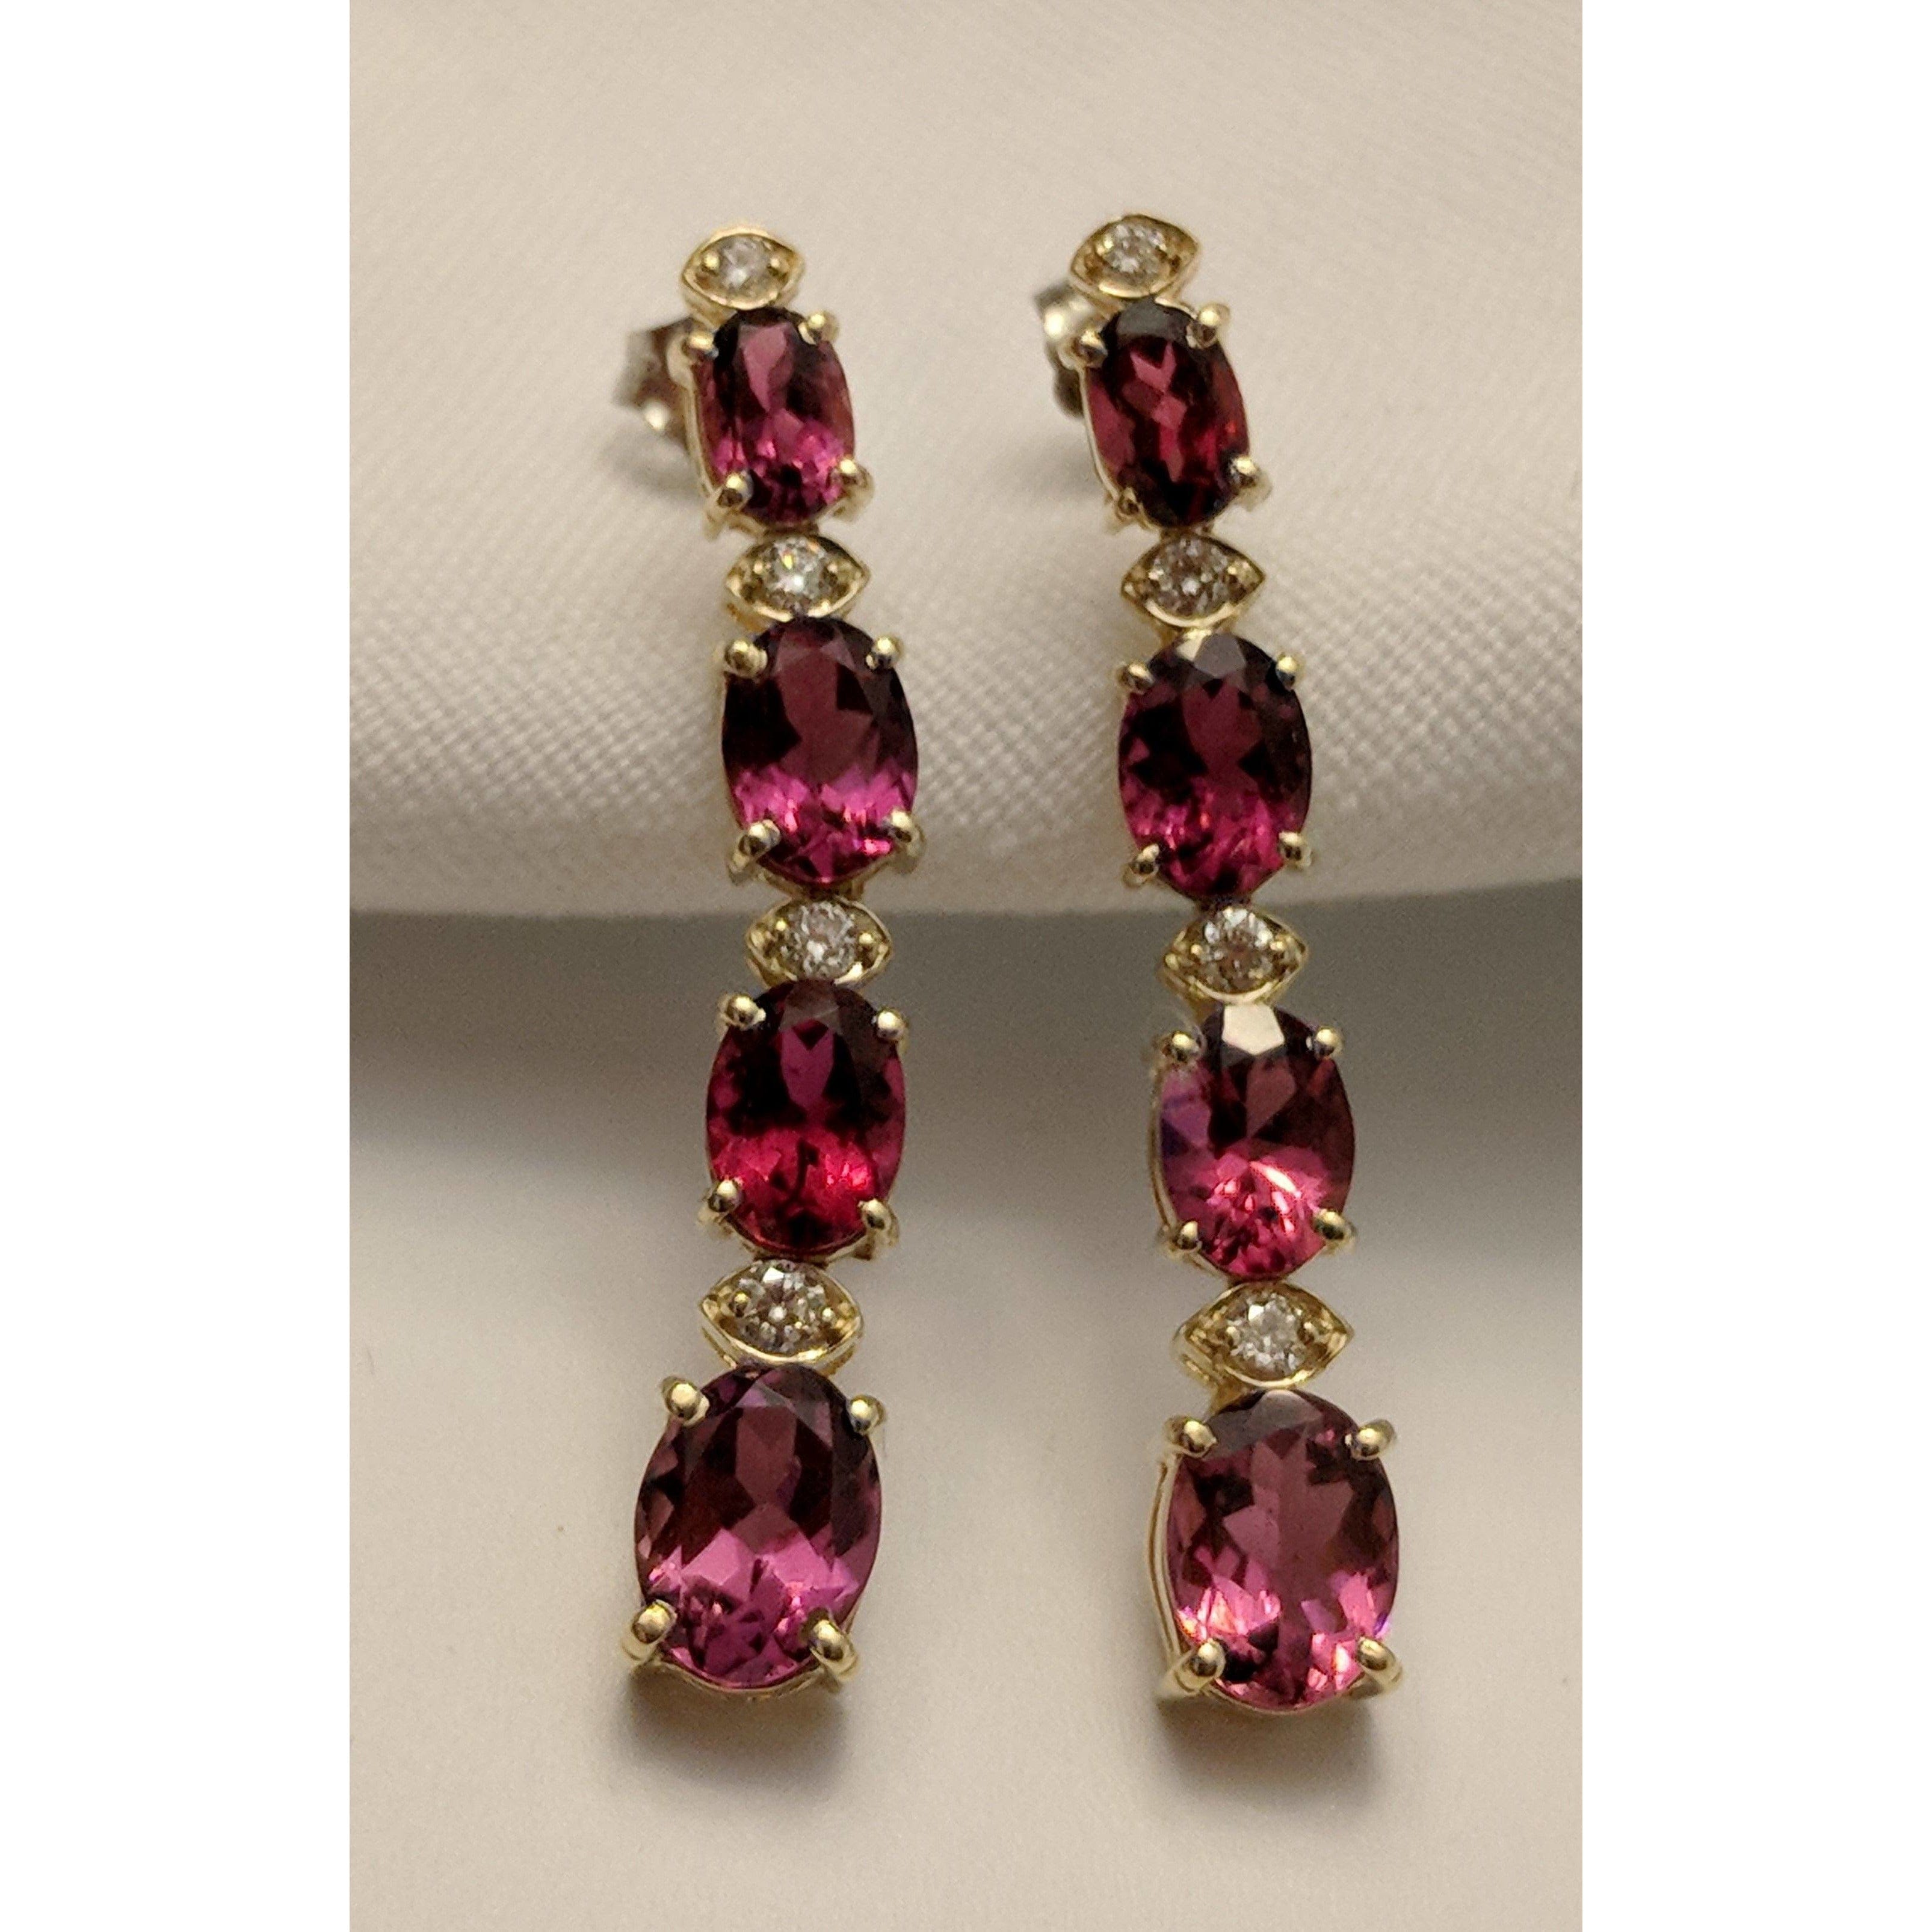 Pink Tourmaline and Diamond SET, 27.4ctw Necklace & 7.45ctw Earrings in 14K Gold, STUNNING! - The Pink Pigs, A Compassionate Boutique